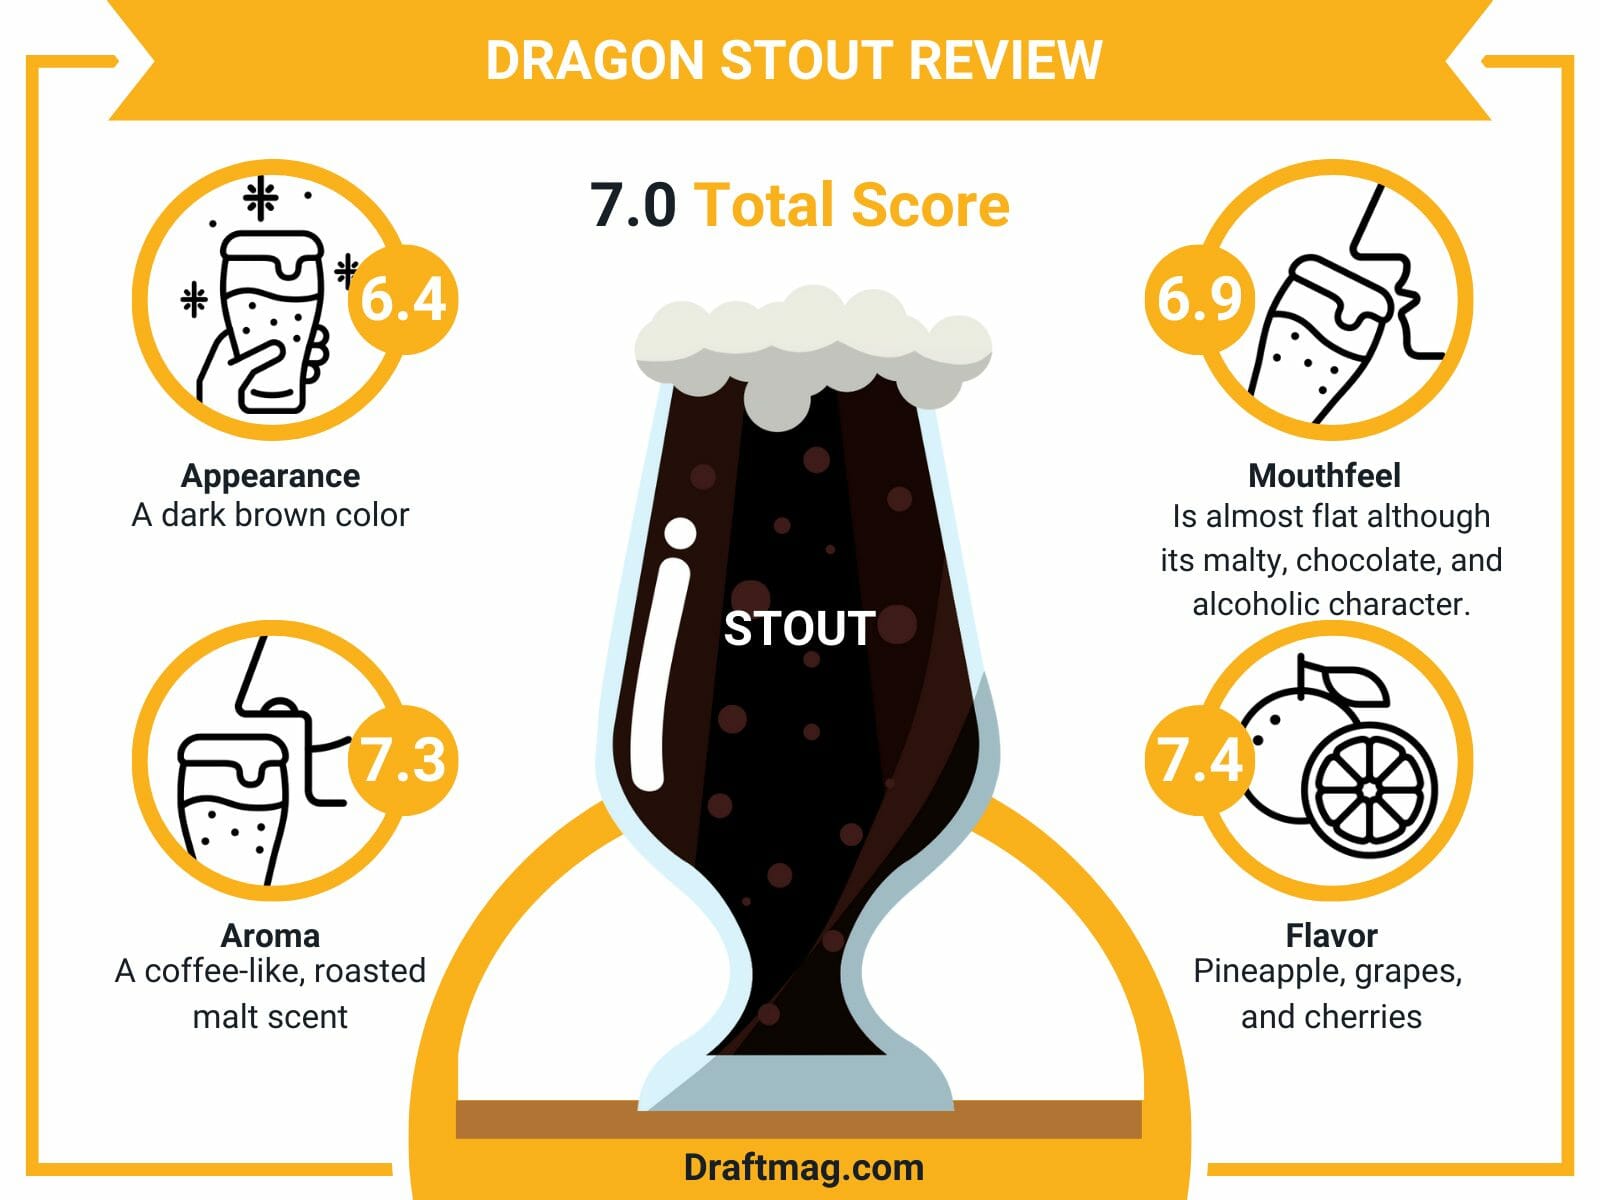 Dragon stout review infographic